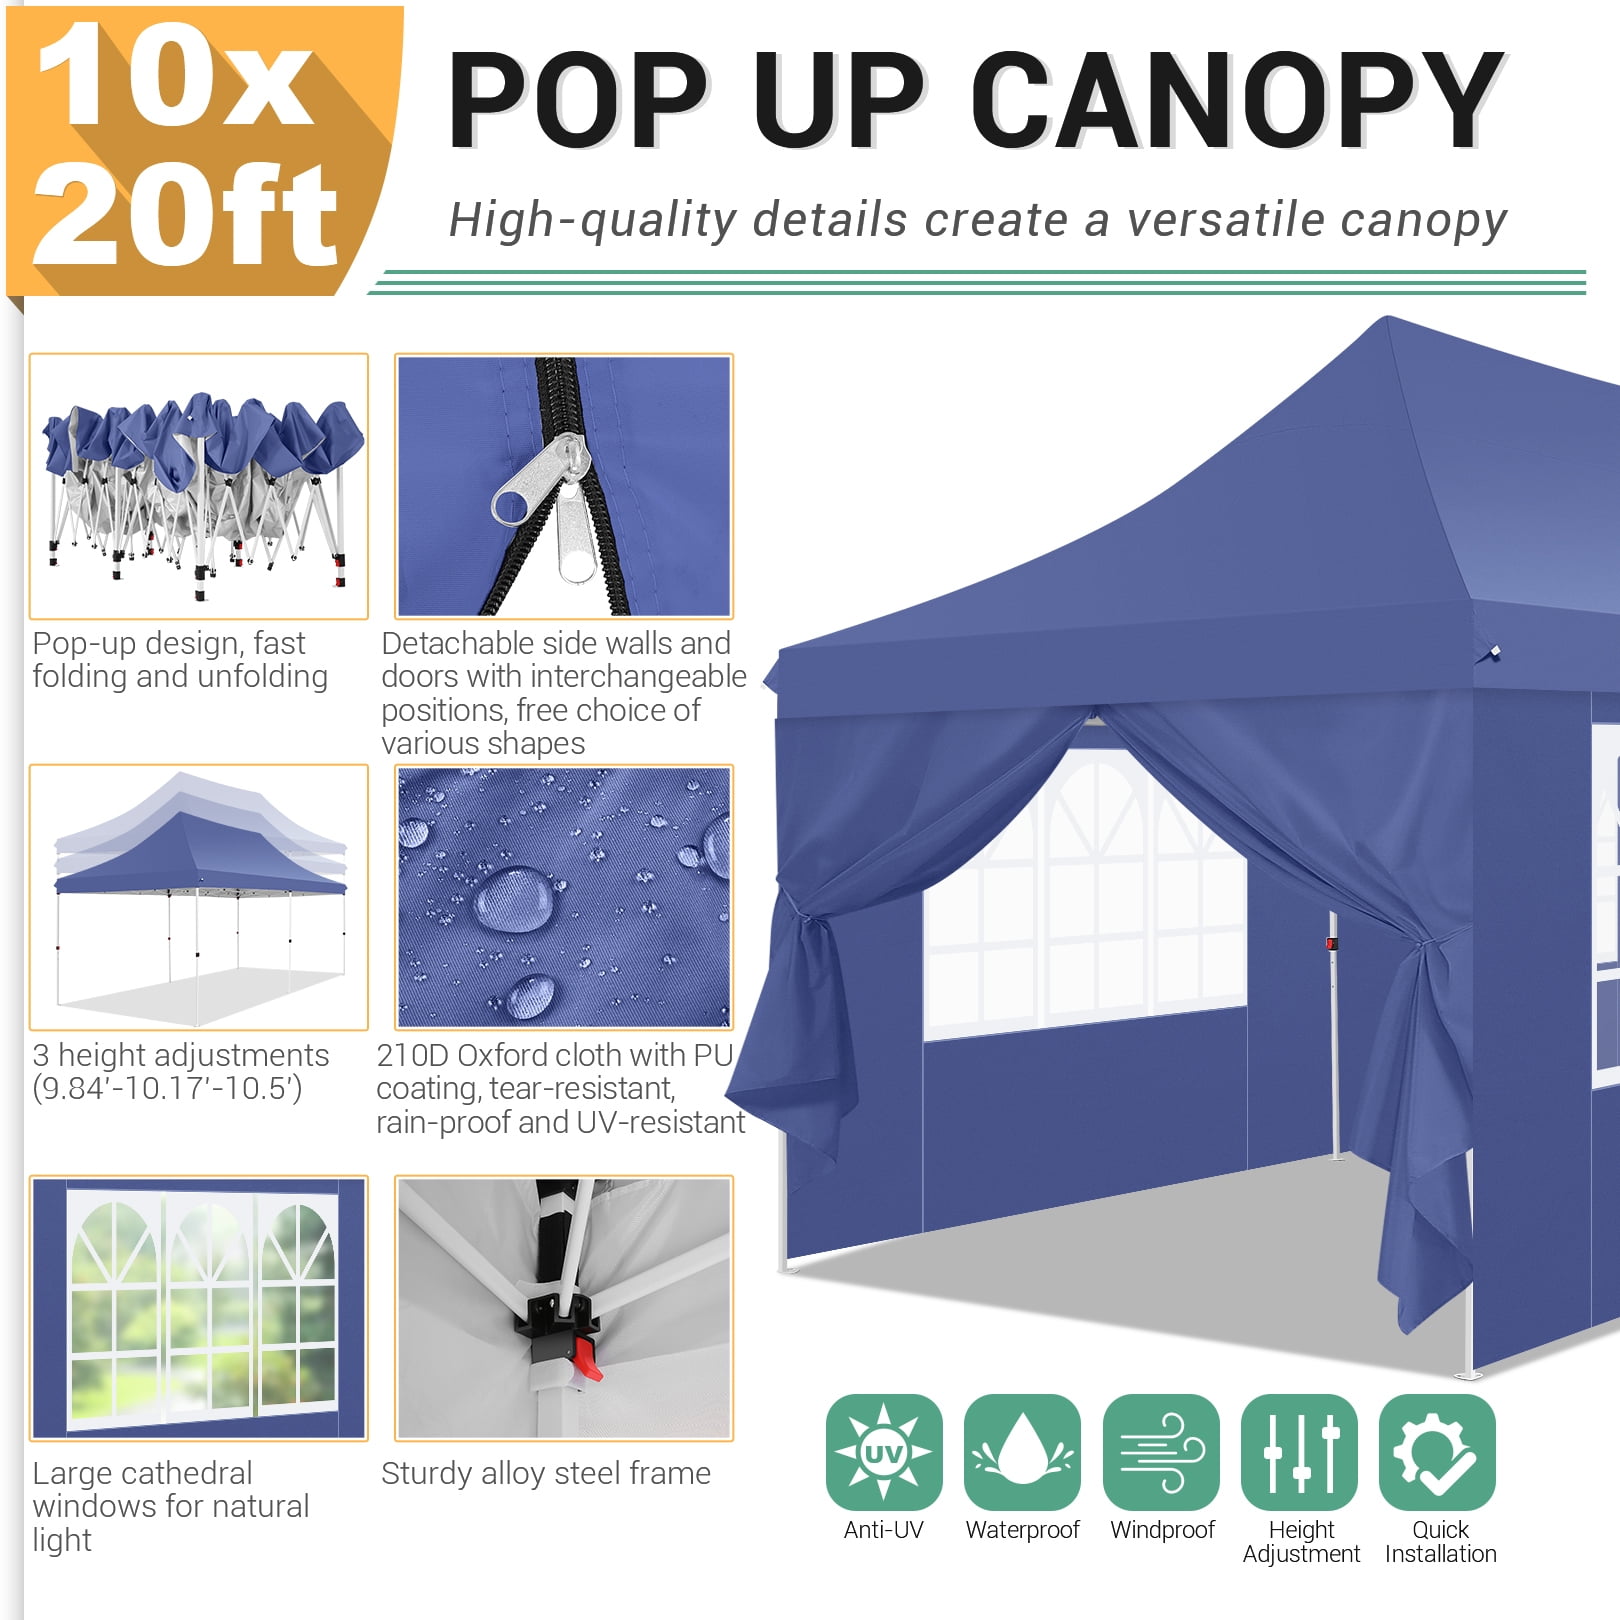 HOTEEL 10' x 20' Pop up Canopy Tent,Heavy Duty Waterproof Commercial Instant Gazebo,Outdoor Canopy for Party,Wedding,Event,Backyard,White